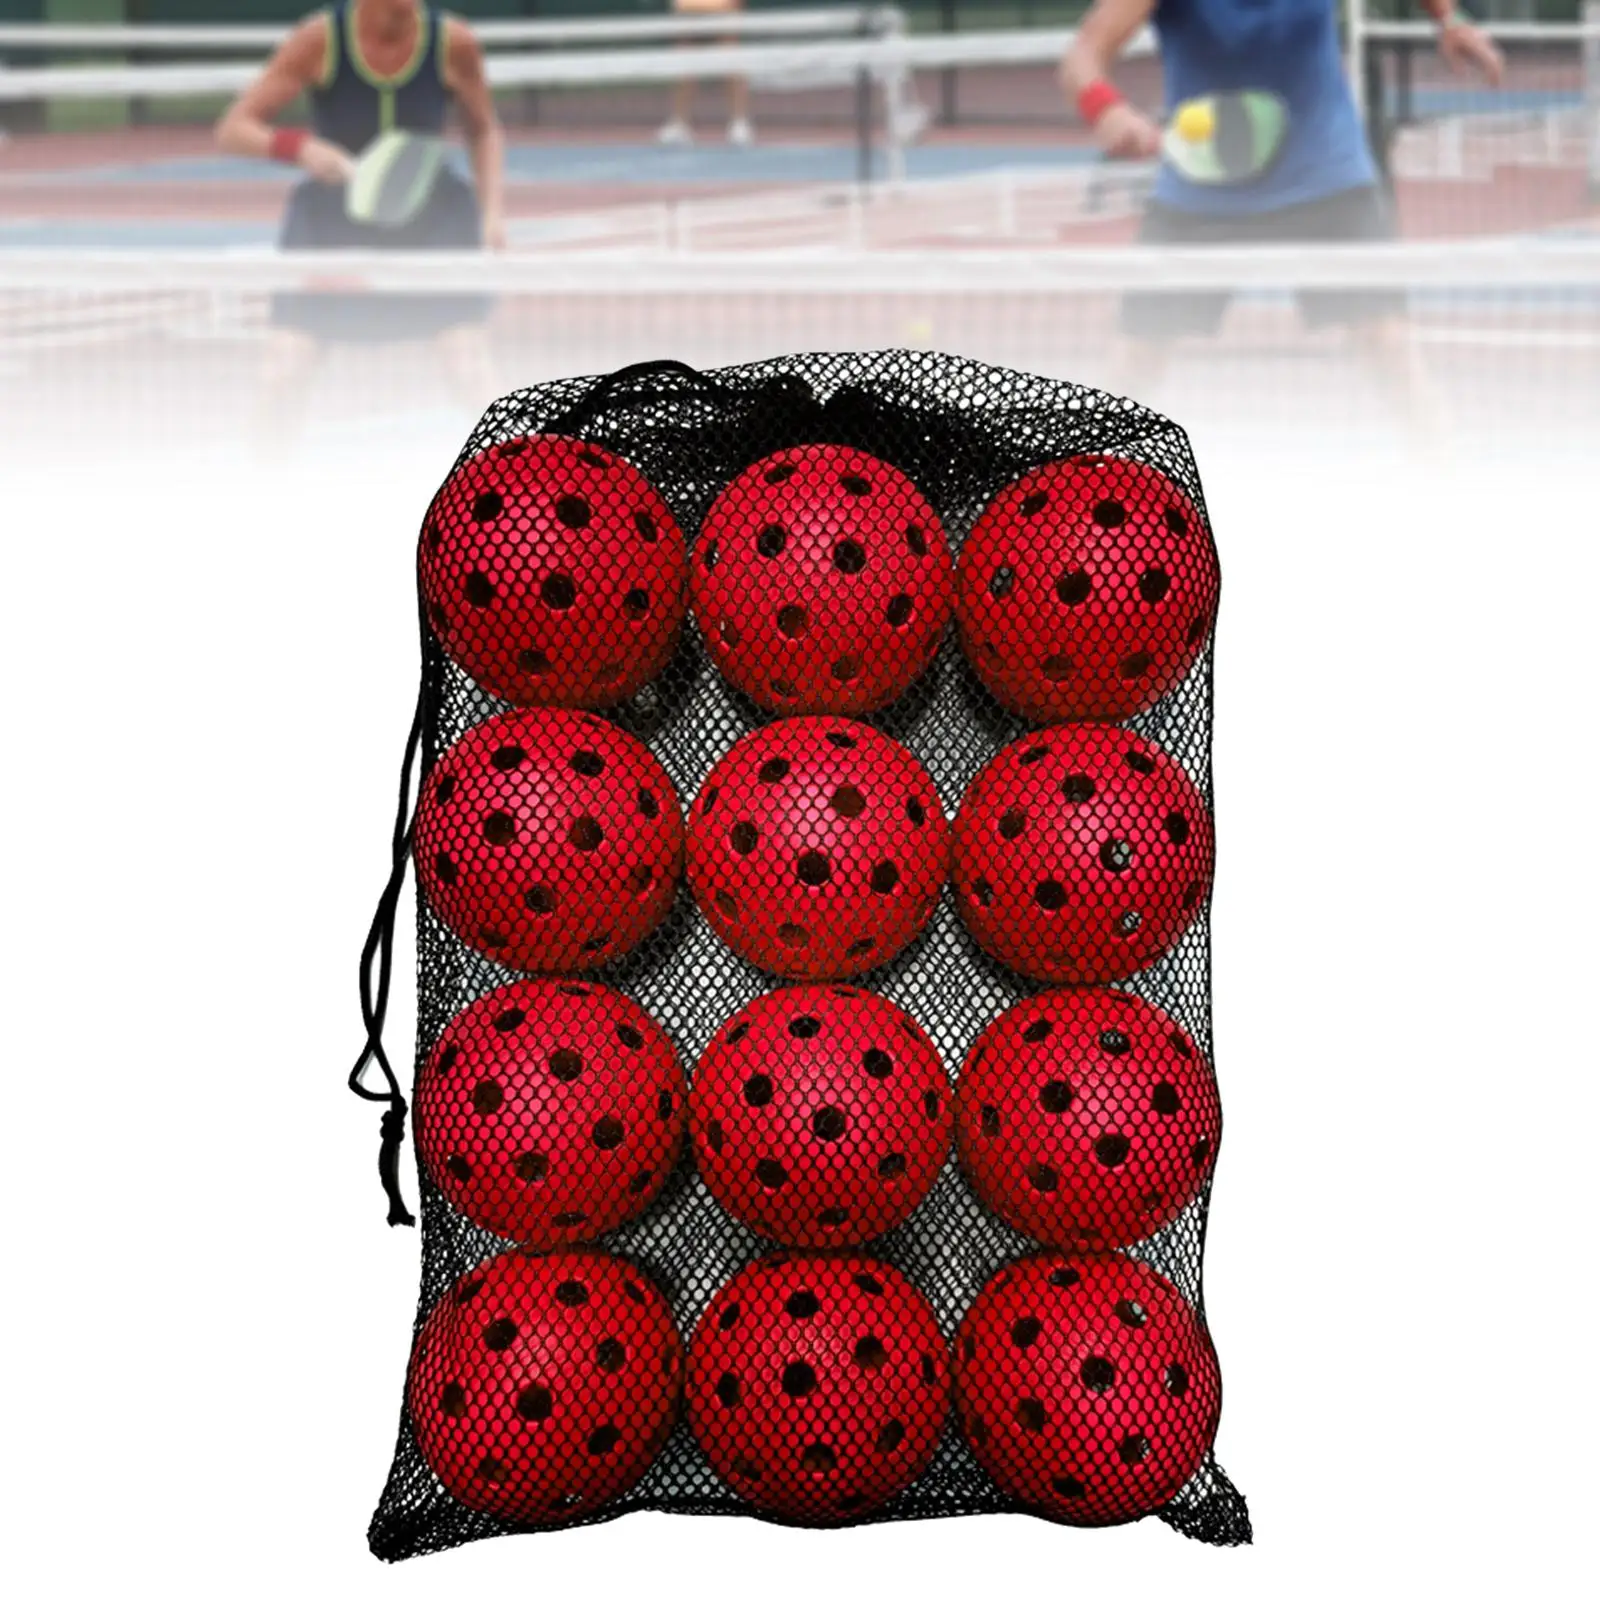 12 Pieces Pickleball Balls Pickle Ball Devices for Outdoor Tournament Play